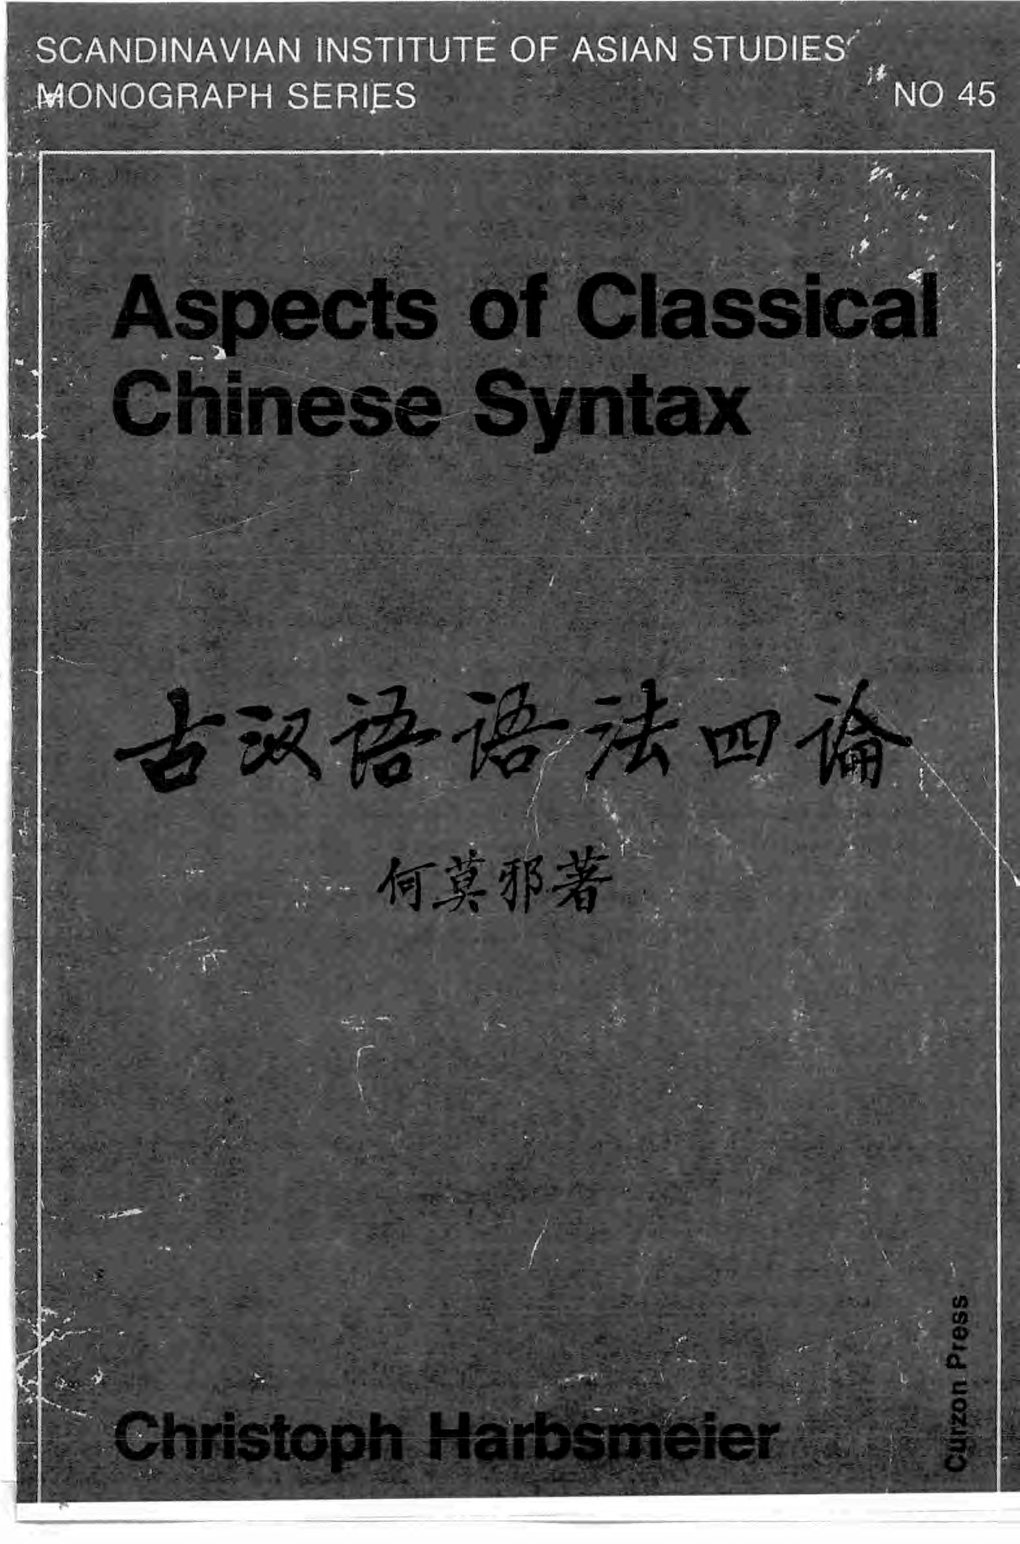 Aspects-Of-Classical-Chinese-Kyoto